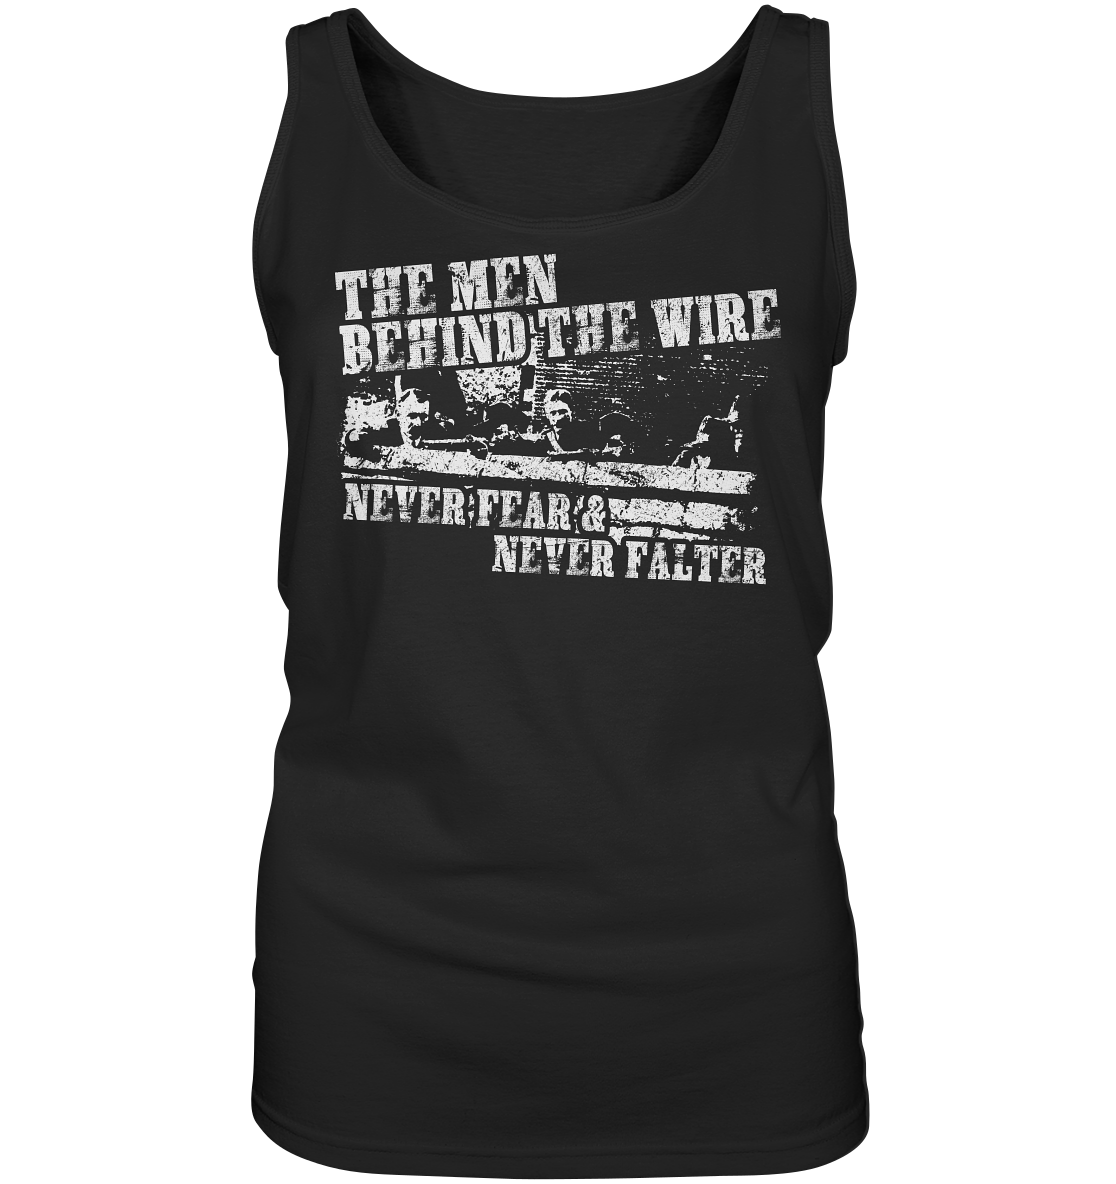 "The Men Behind The Wire" - Ladies Tank-Top